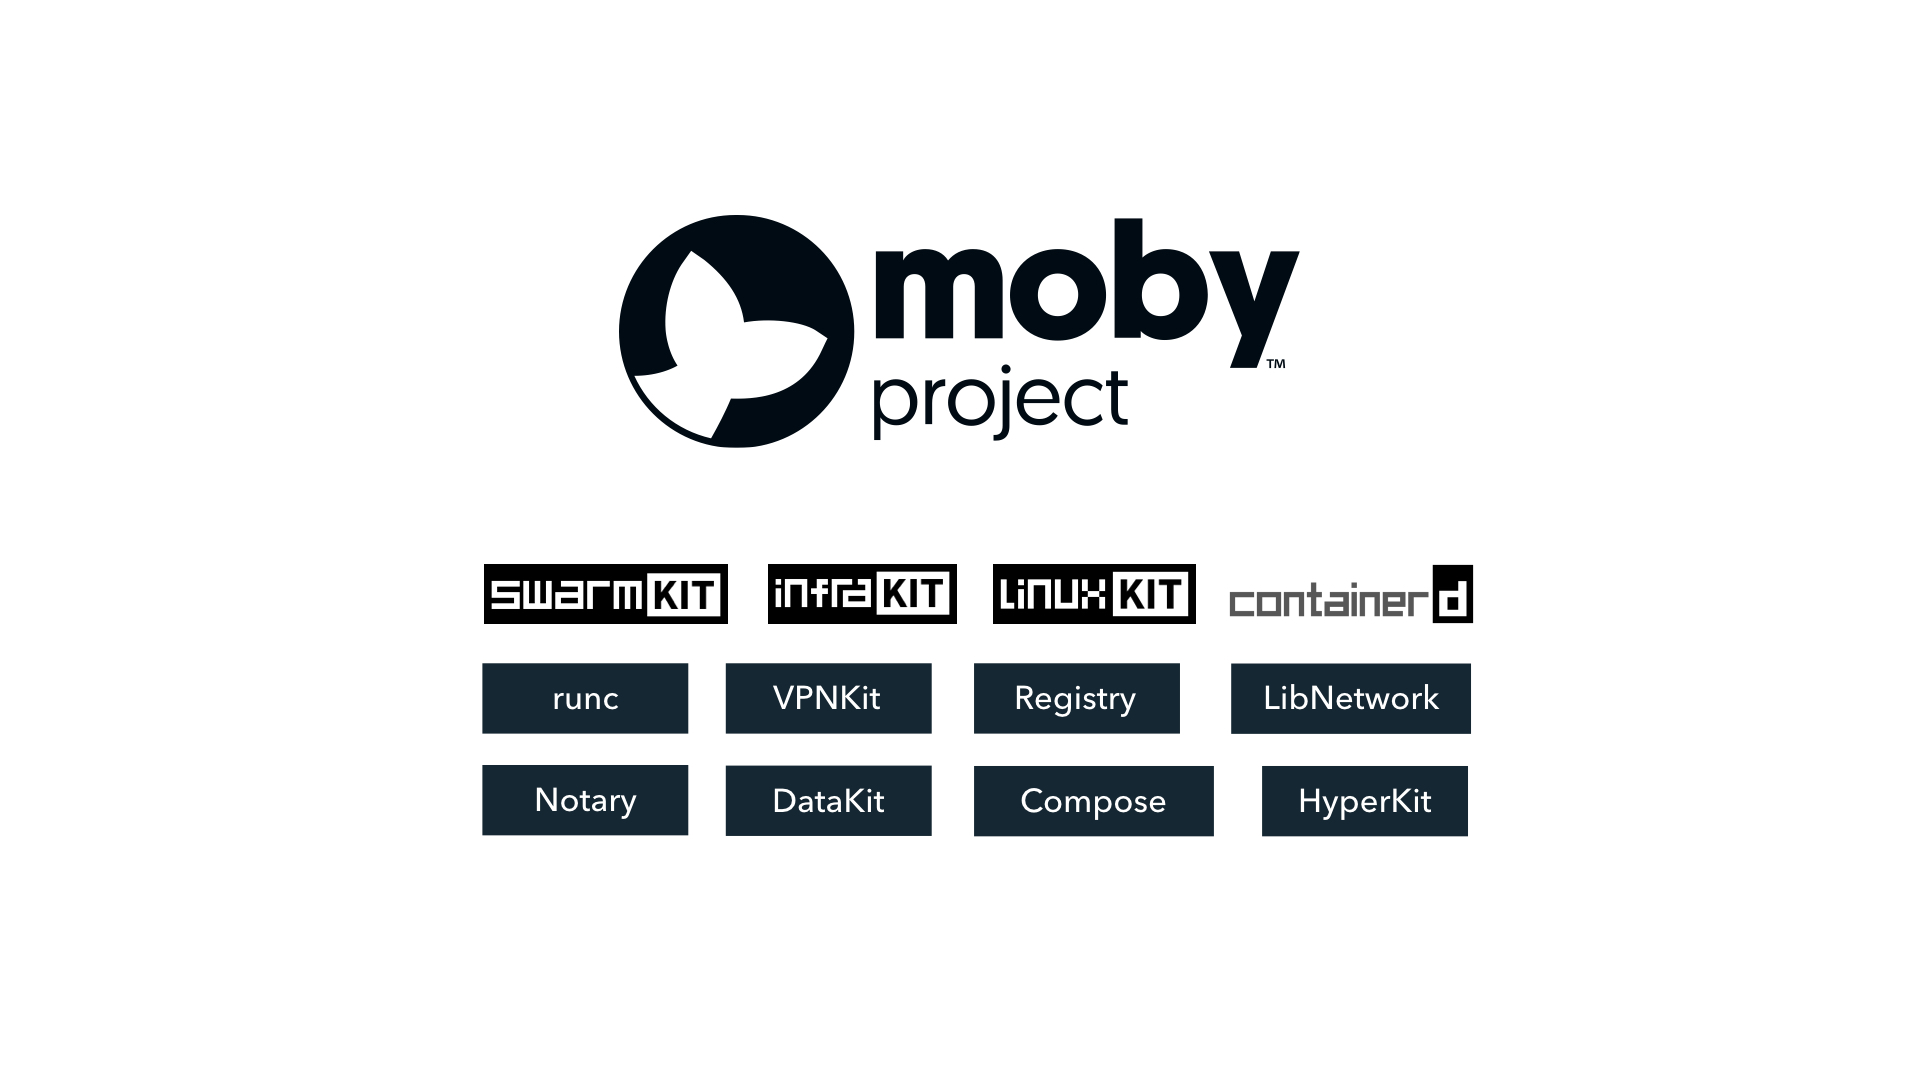 Moby projects